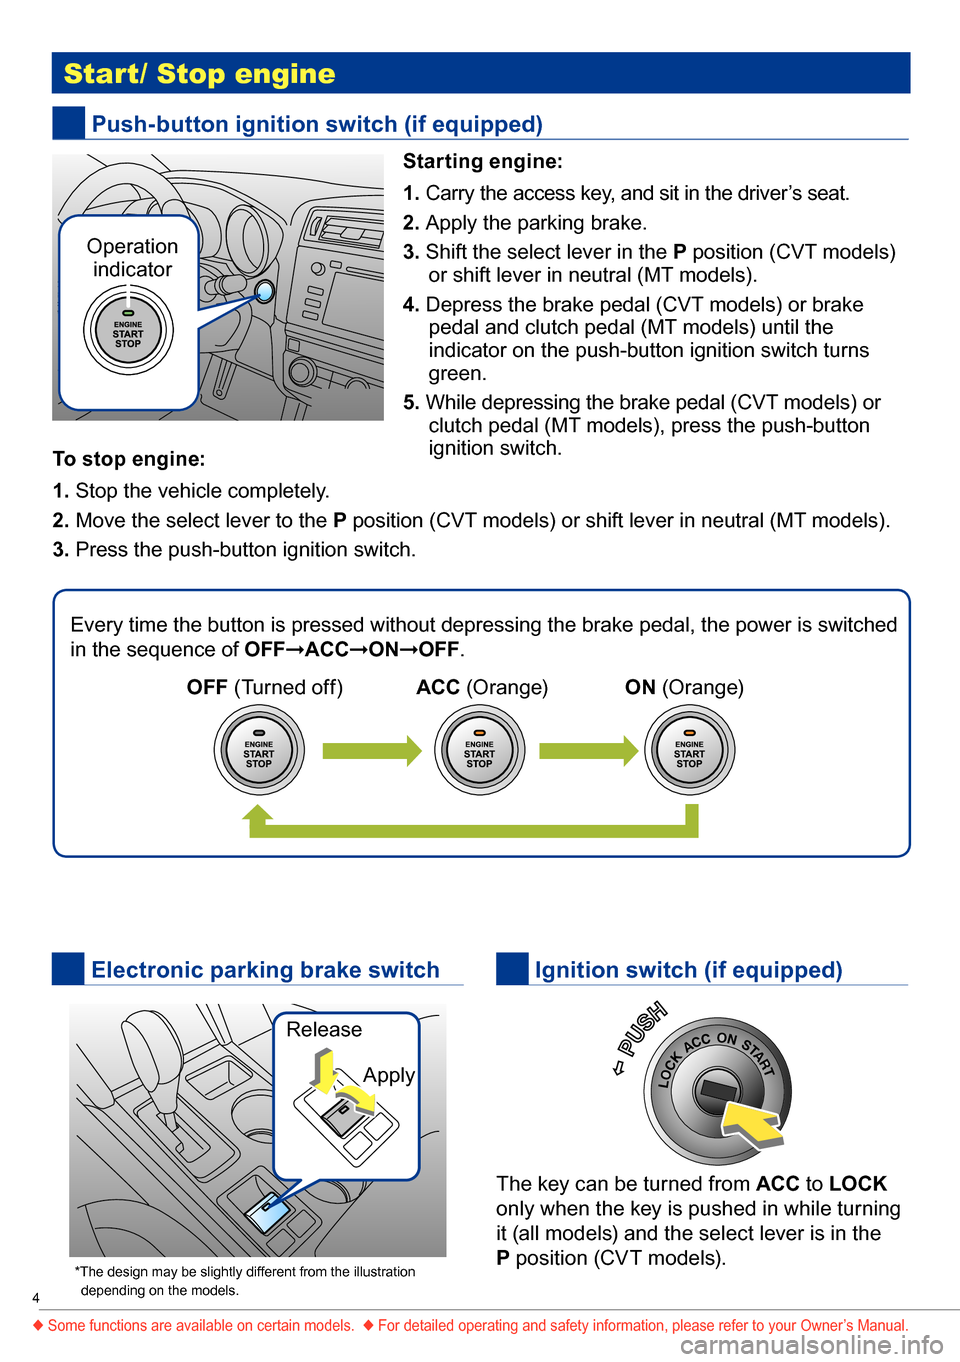 SUBARU OUTBACK 2016 6.G Quick Reference Guide 4
 Start/ Stop engine
The key can be turned from ACC to LOCK 
only when the key is pushed in while turning 
it (all models) and the select lever is in the  
P position (CVT models).
 Push-button ignit